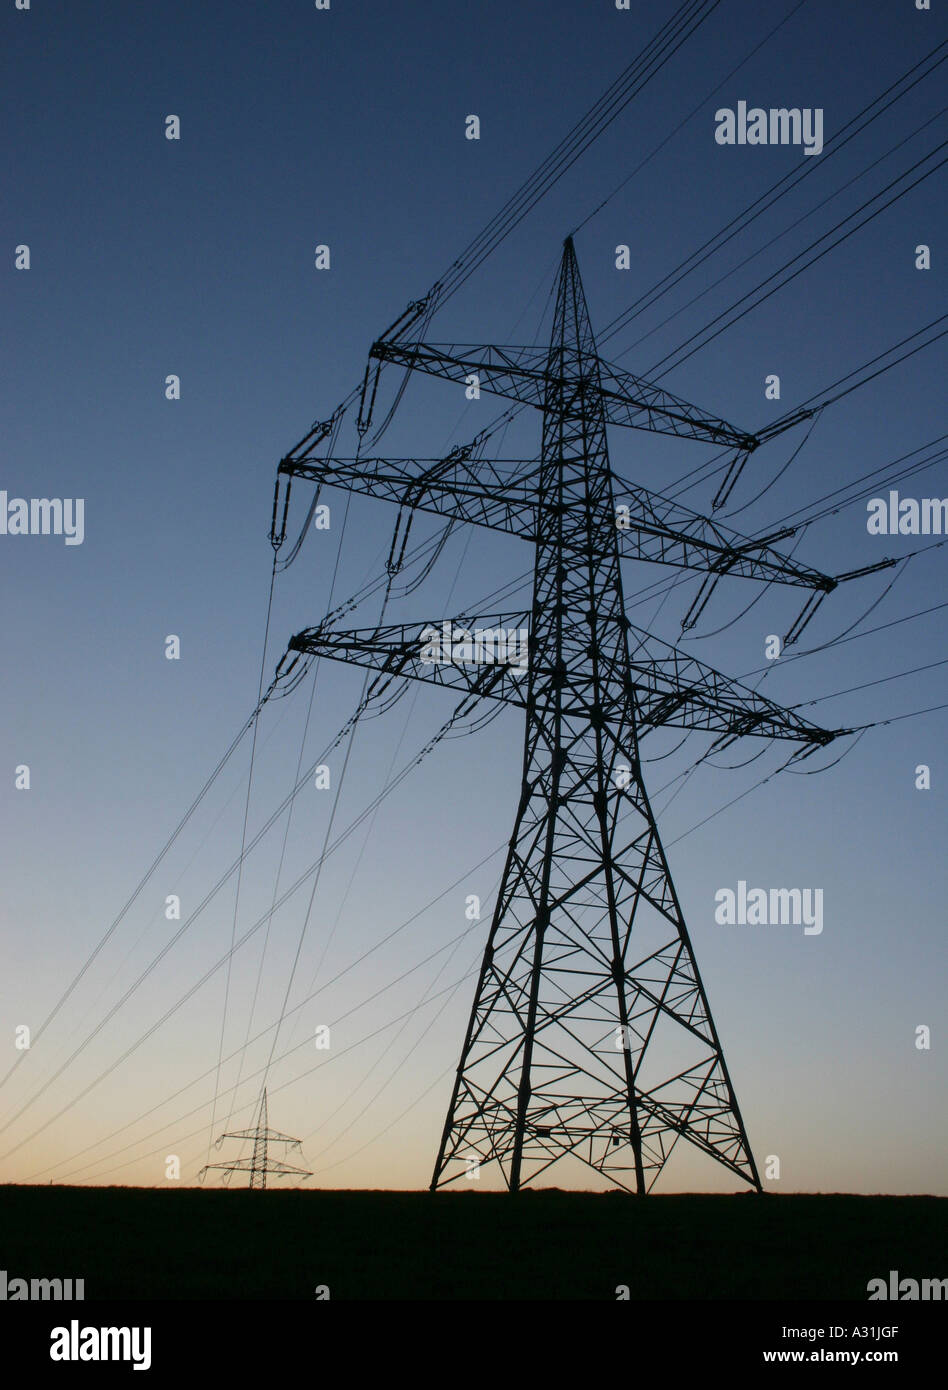 Electricity pylon and power lines low angle view Stock Photo